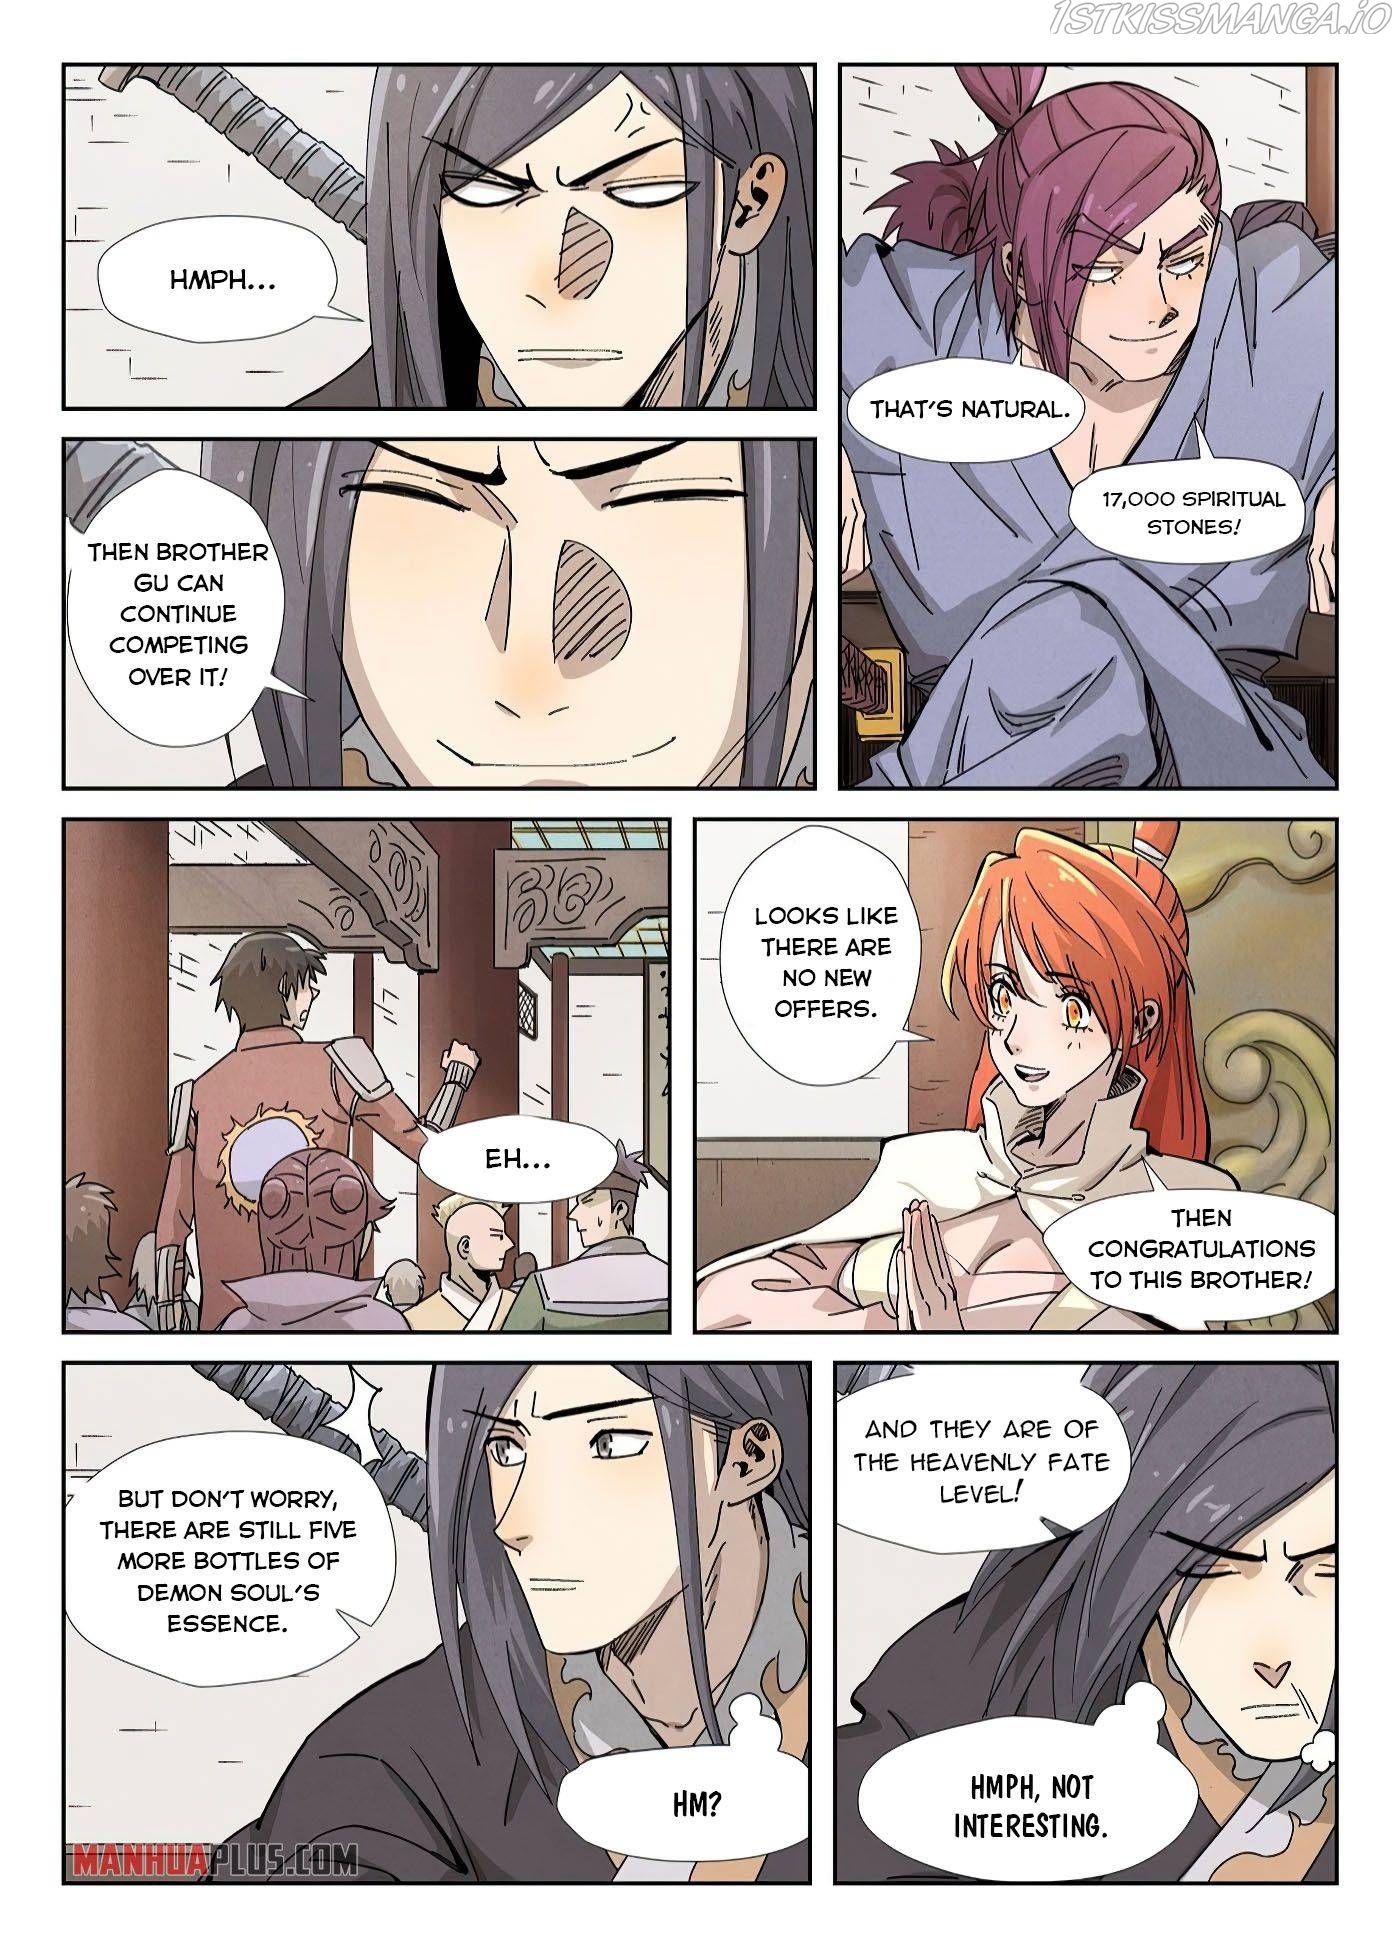 Tales of Demons and Gods Manhua Chapter 336.6 - Page 4